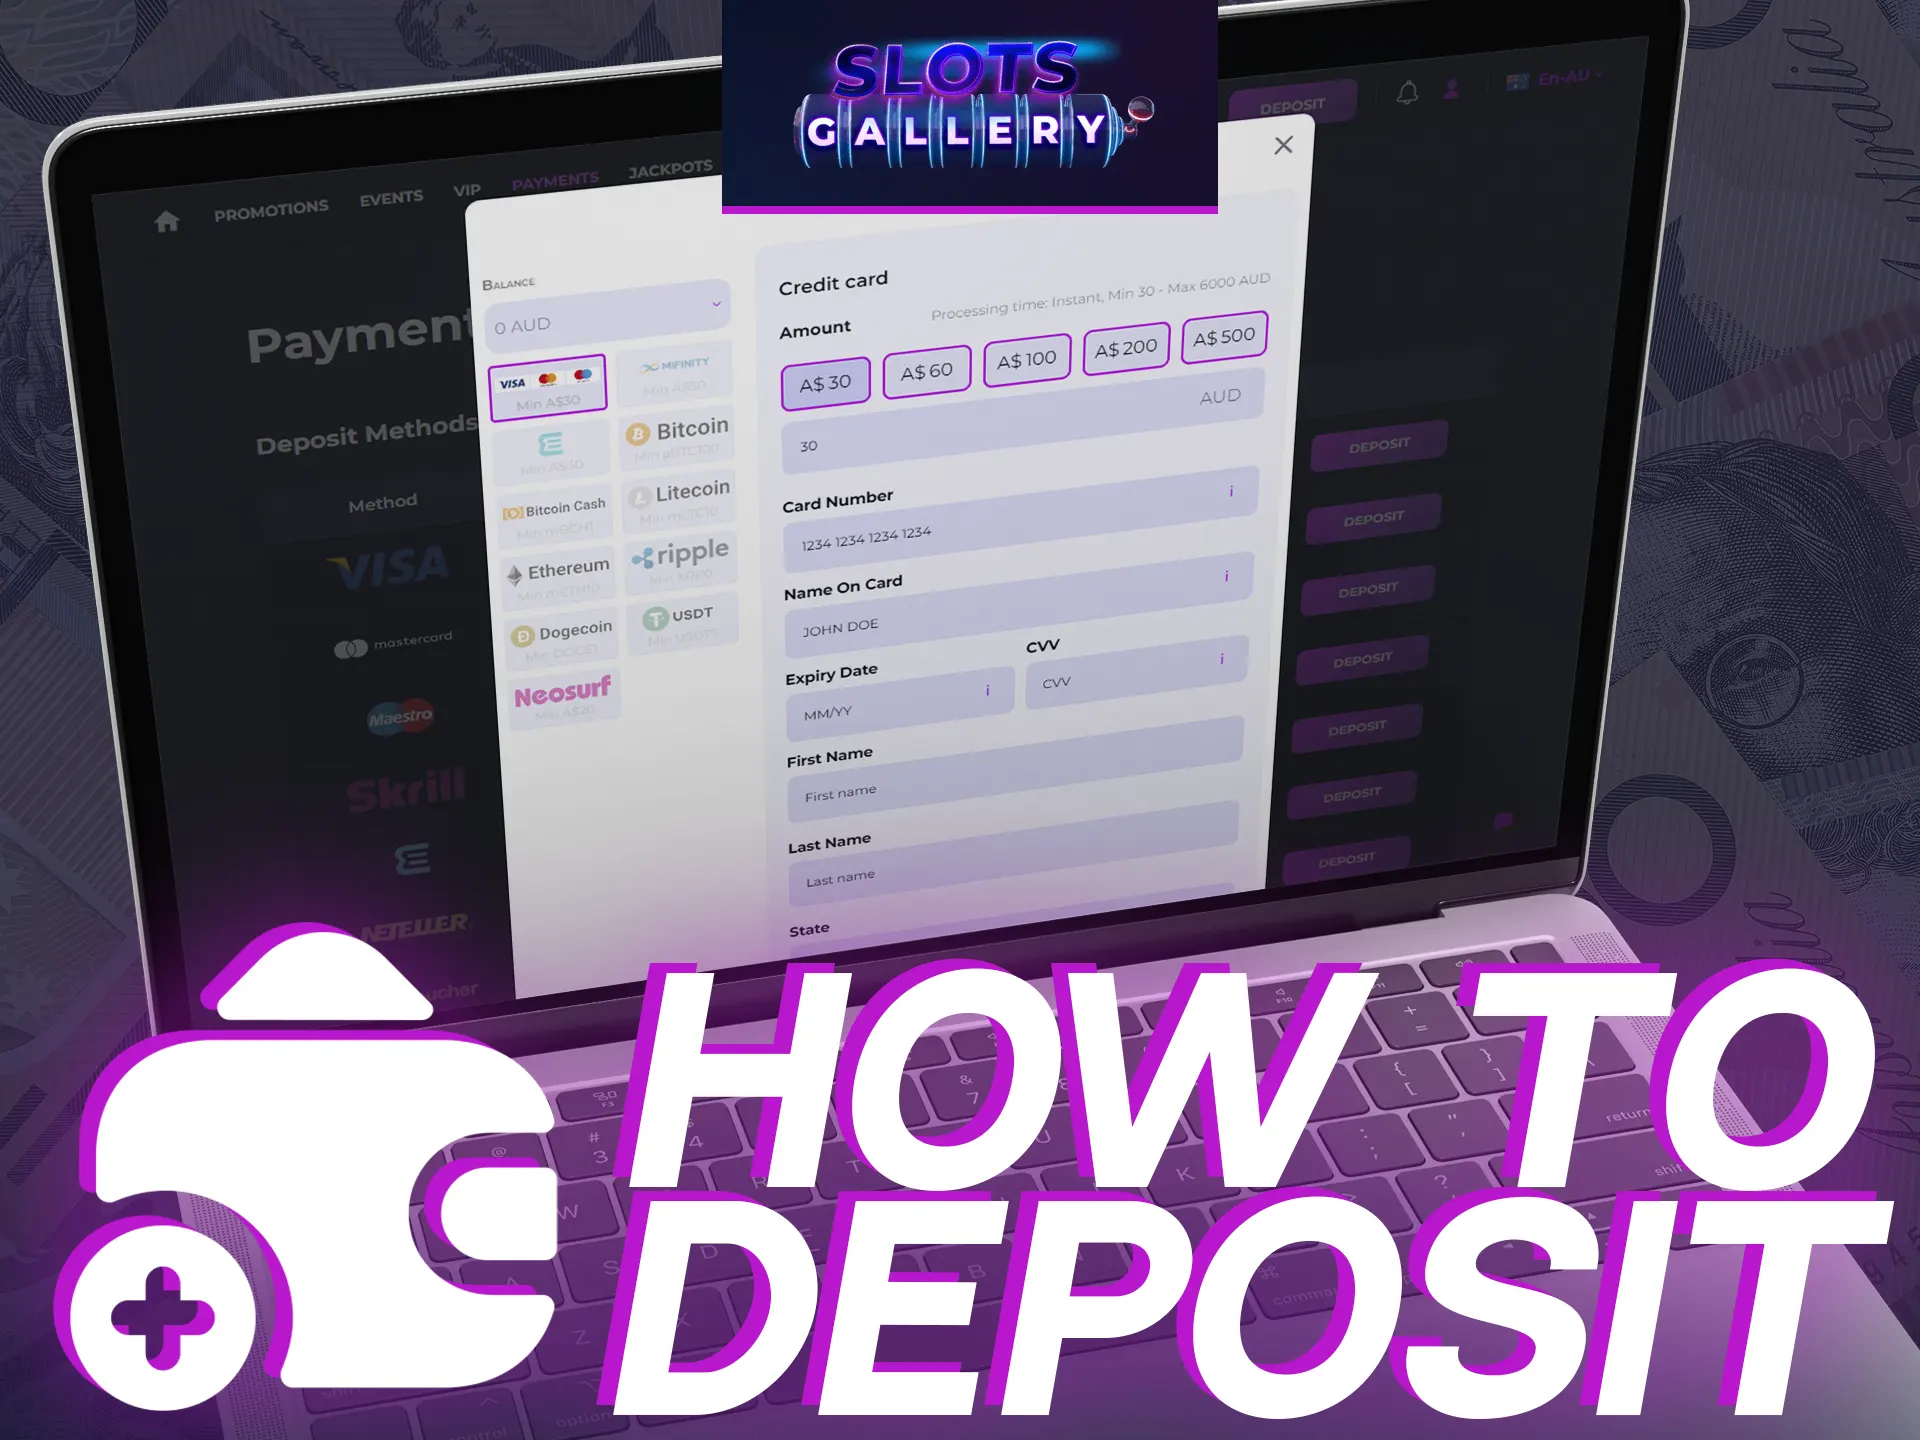 Learn how you can deposit at Slots Gallery.